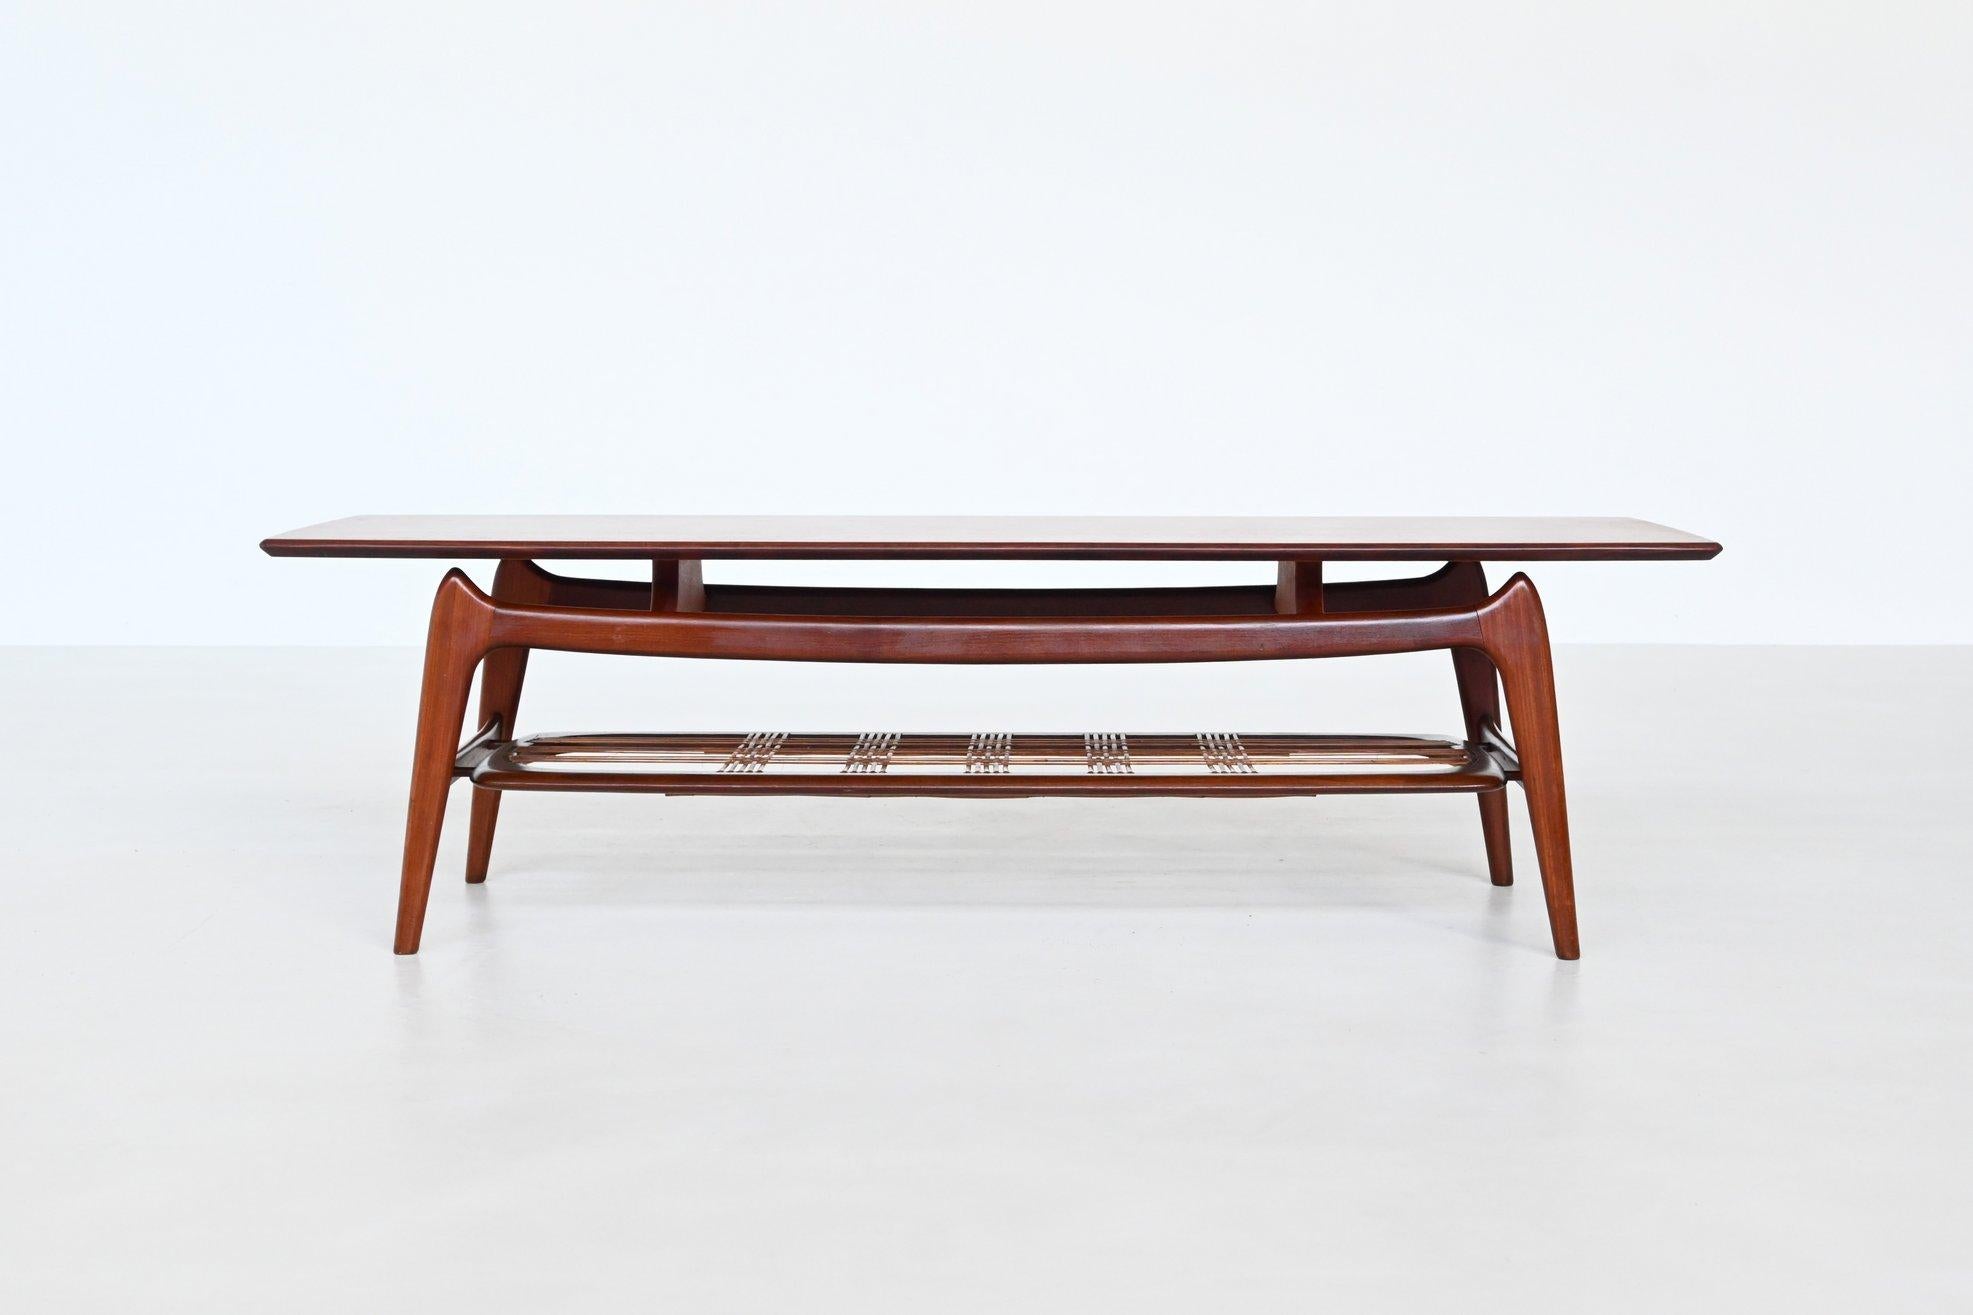 Beautiful shaped coffee table designed by Louis van Teeffelen and manufactured by Webe Meubelen, The Netherlands 1960. The table is made of veneered teak supported by an organic sculpted solid teak frame and it has an original woven rattan magazine